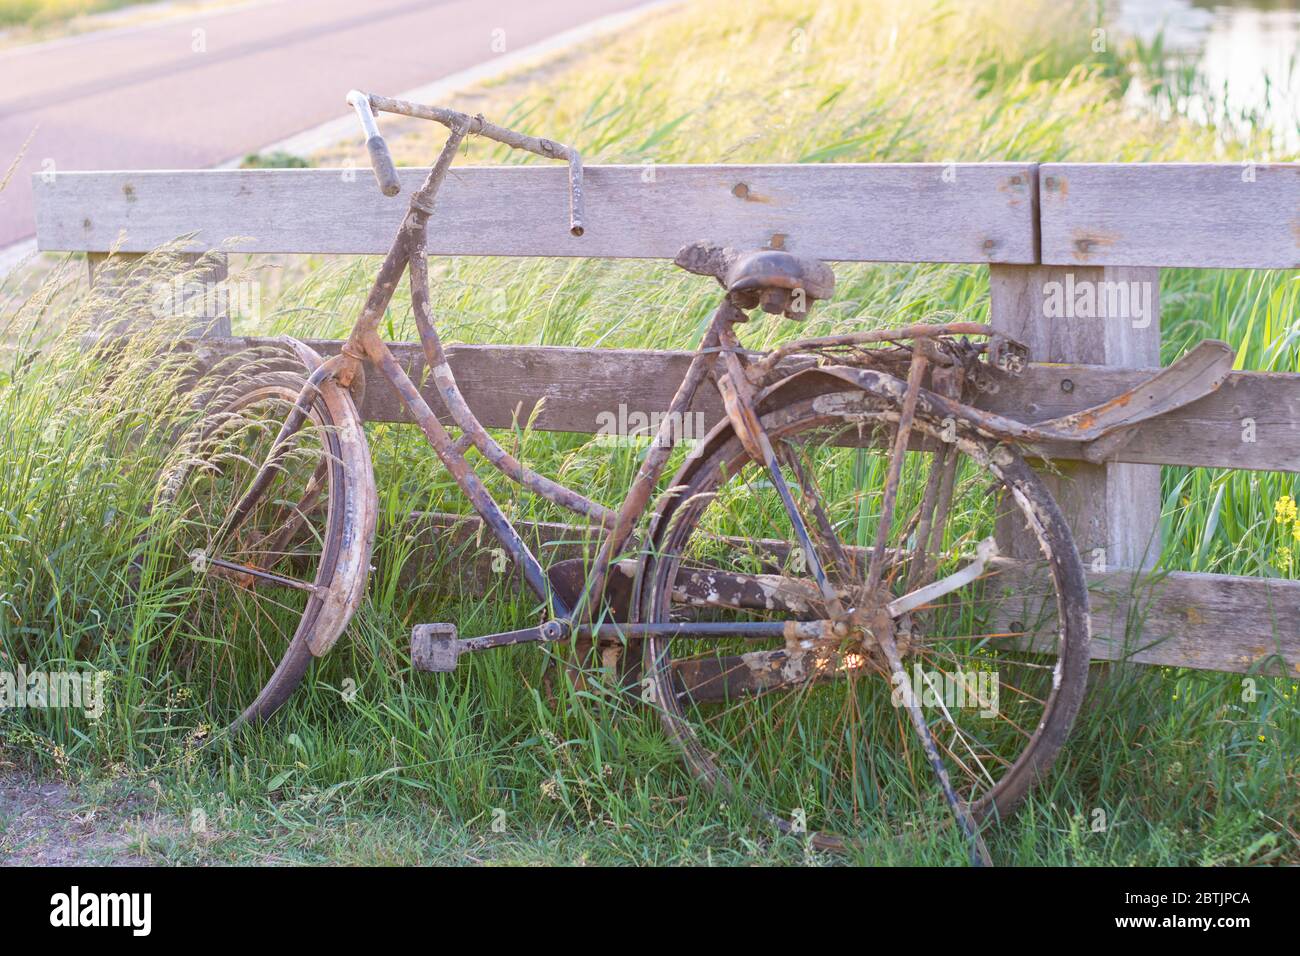 An old abandoned rusty bike parked against wooden fence. Old fashioned classic bicycle stands forgotten along a bicycle path. Fished out of the ditch Stock Photo